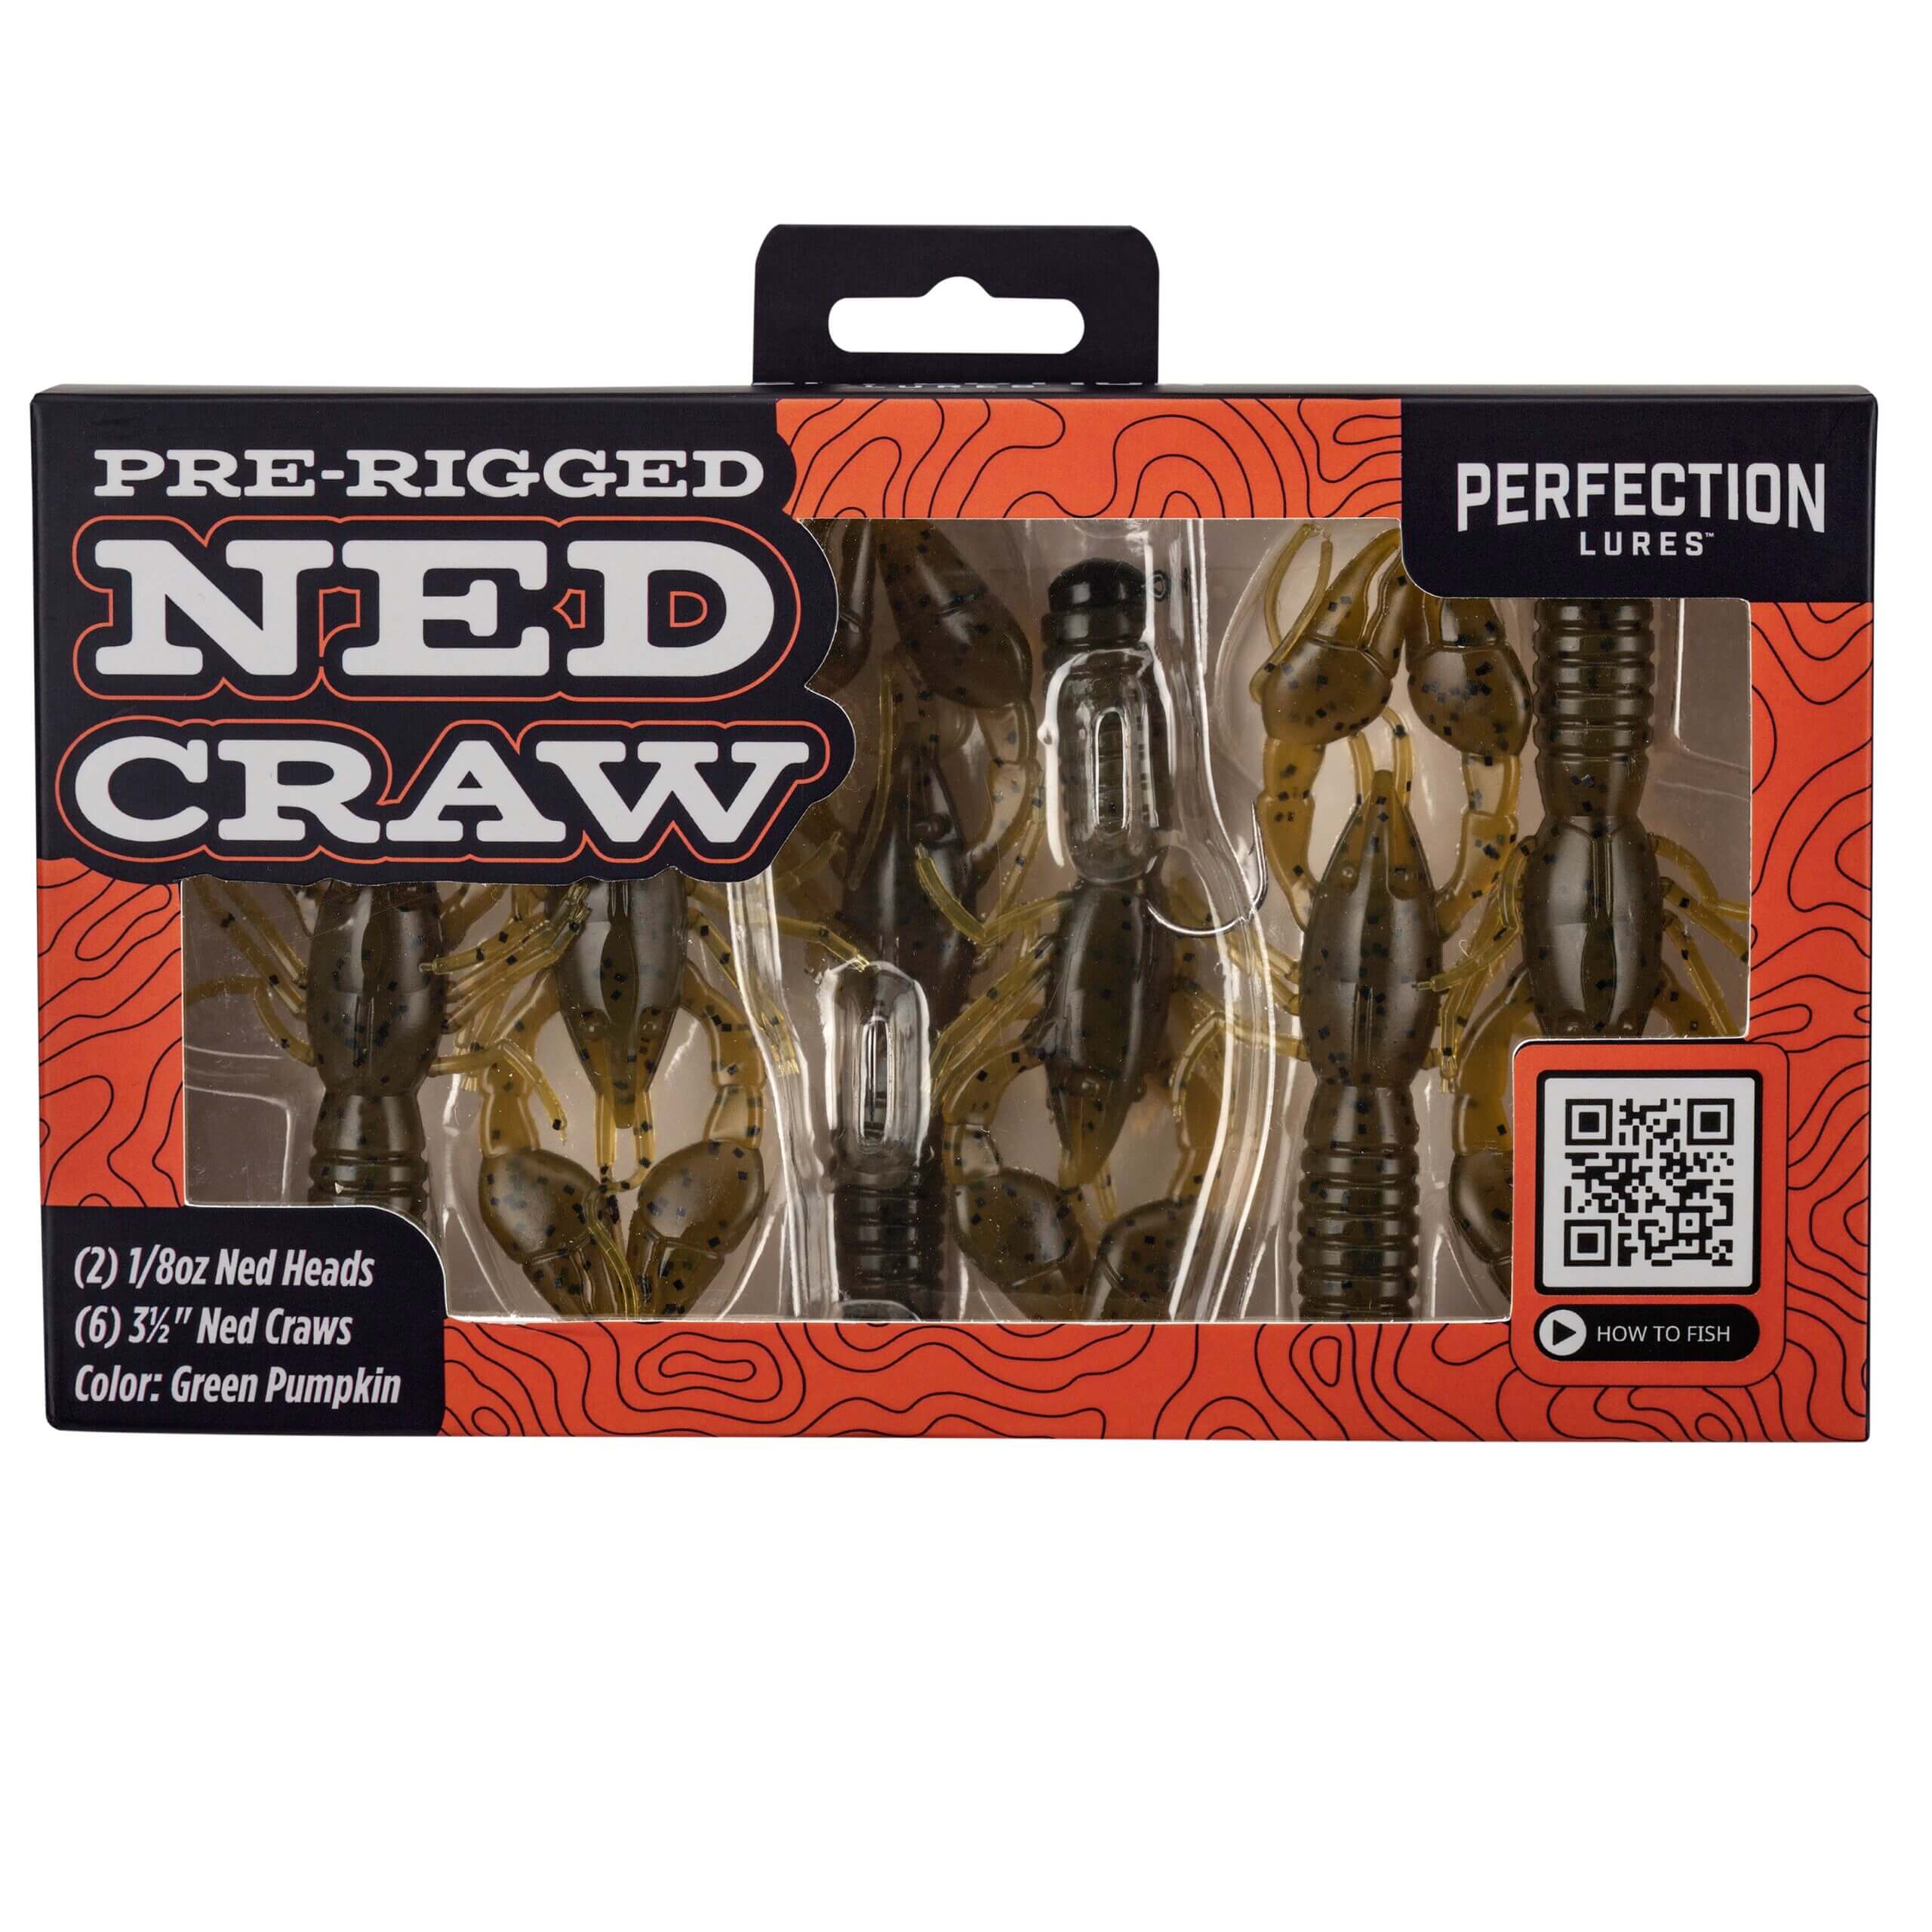 Dudley's Pre-Rigged Ned Rig Kit 9PC